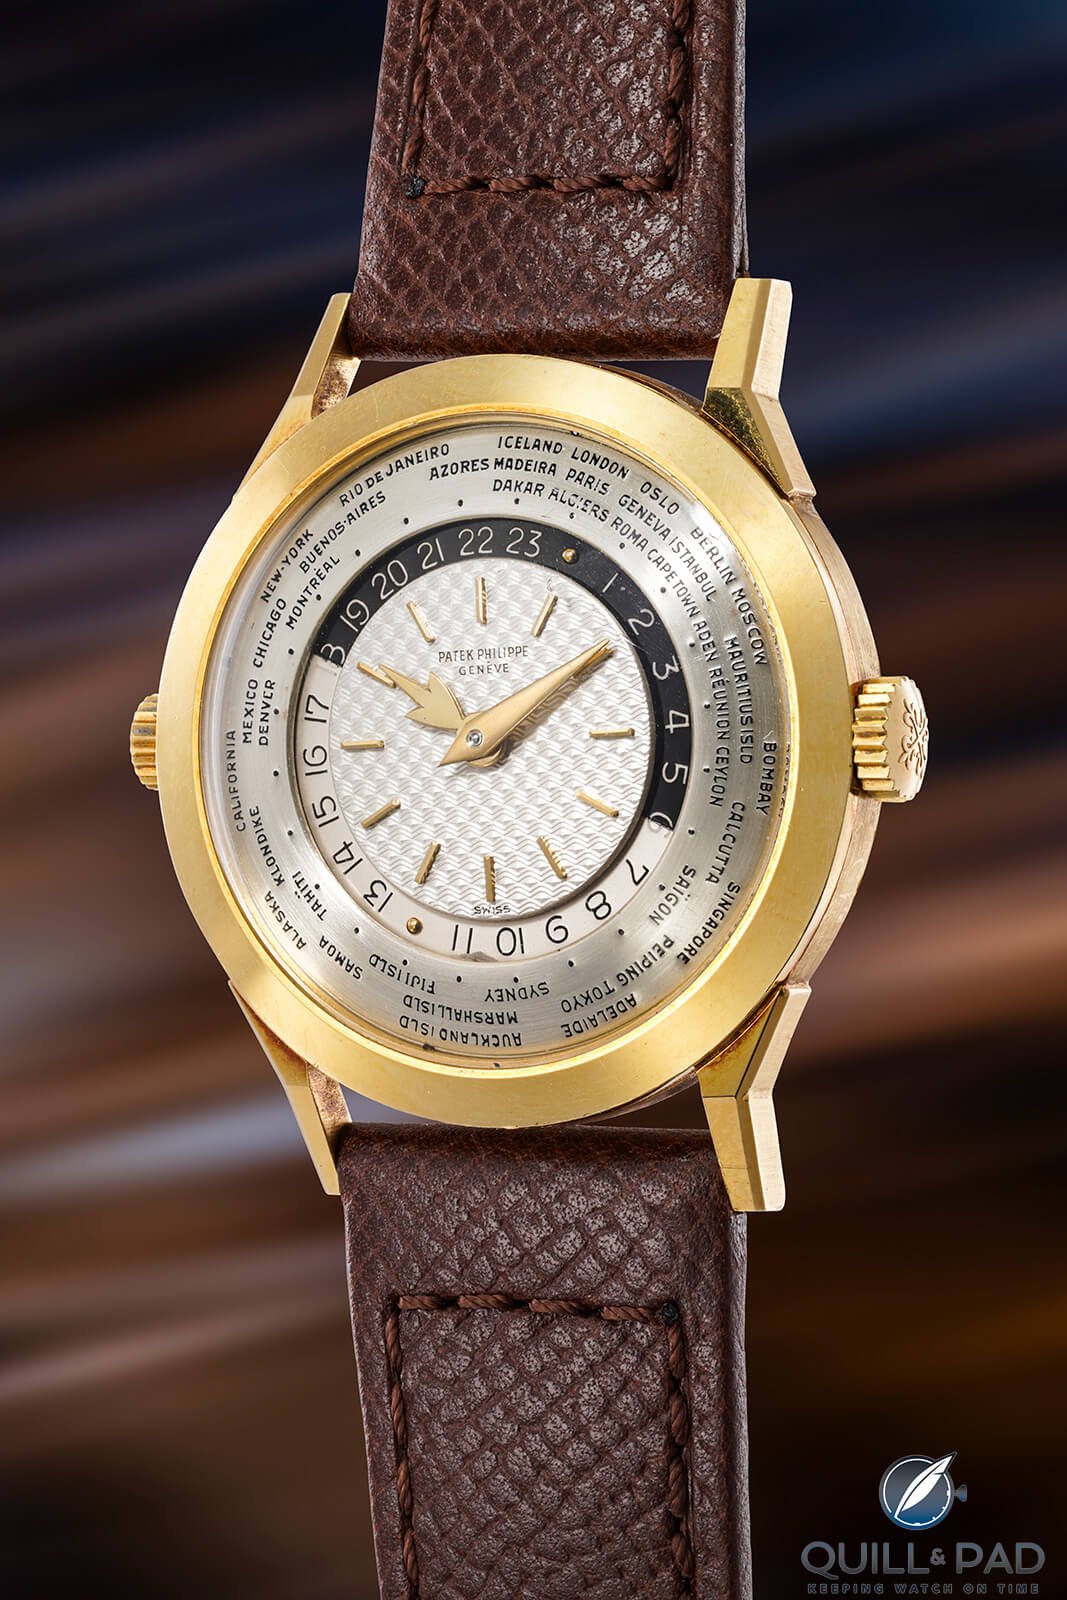 Top 10 Watches from Phillips Geneva Watch Auction: XIX totaling $40 million – Rolex, Patek Philippe and Akrivia/Rexhep Rexhepi Dominate